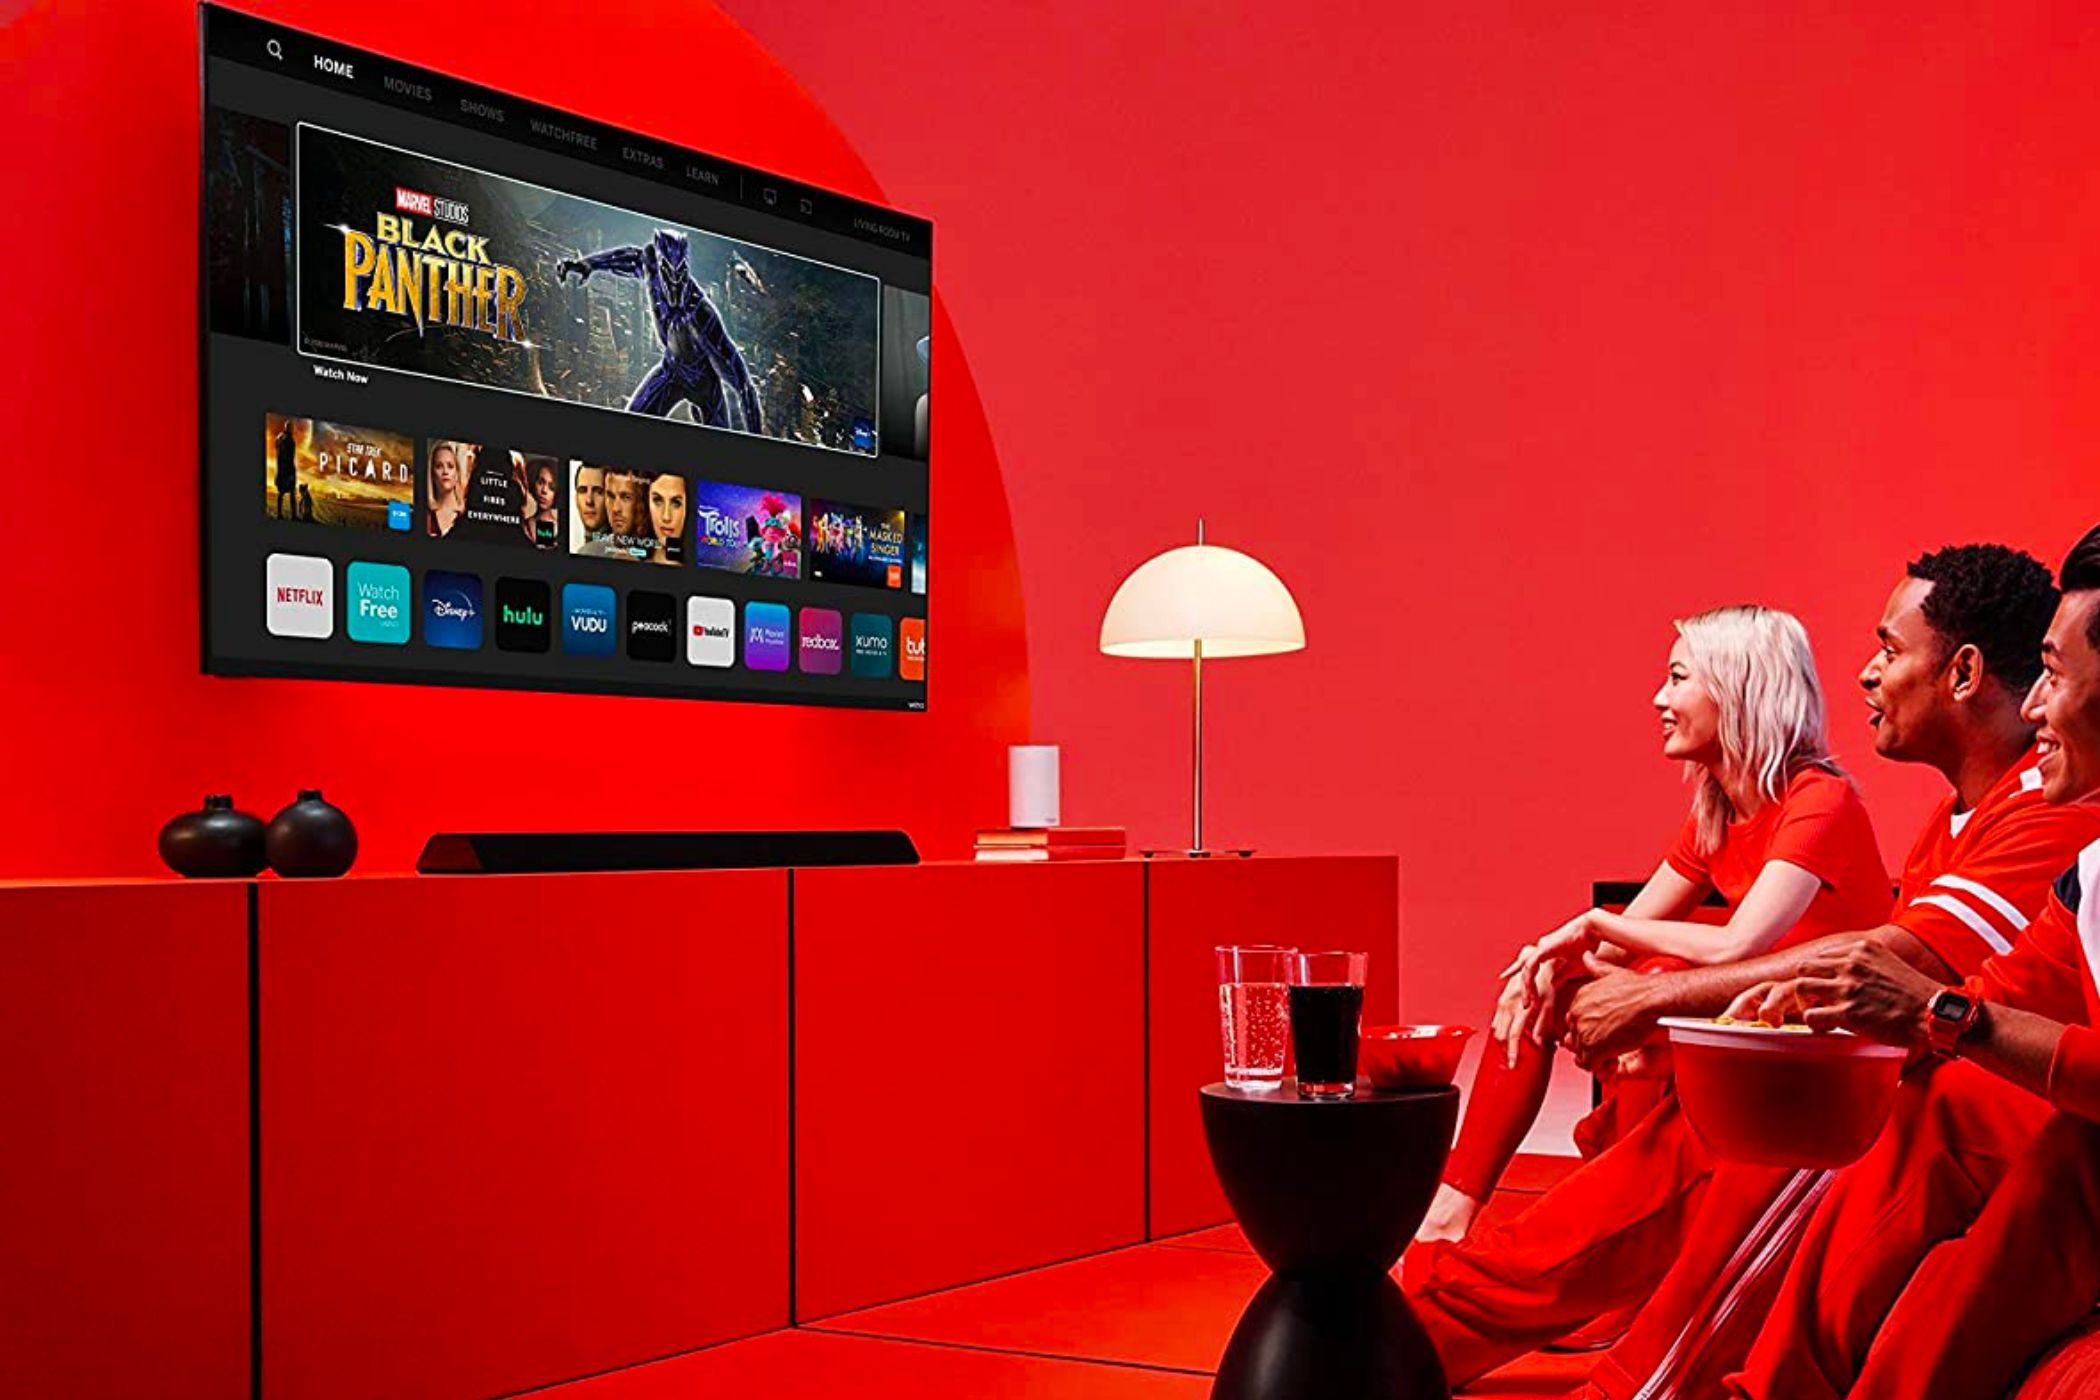 An image showing the Vizio M-series Quantum LED TV over a red-colored wall with matching red lighting in the room.